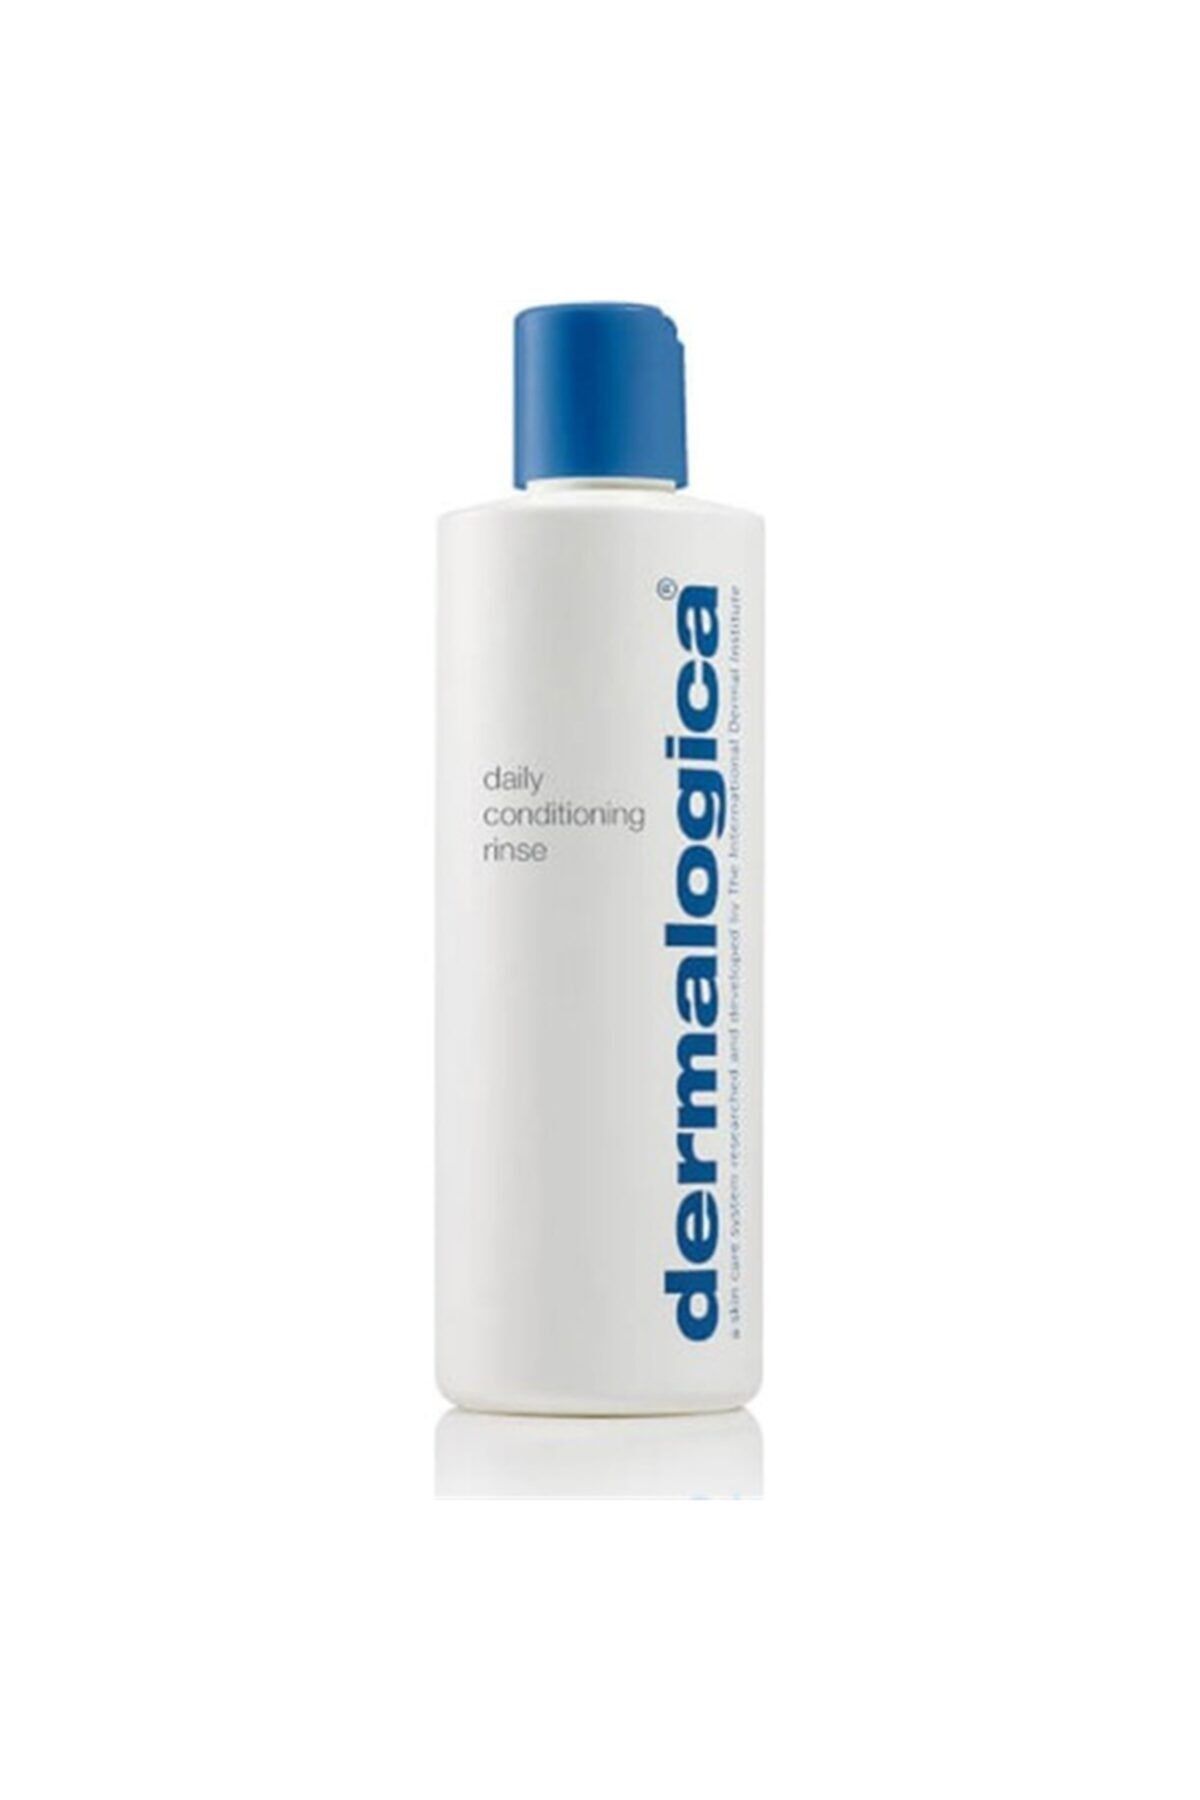 Dermalogica Daily Conditioning Rinse 250 ml